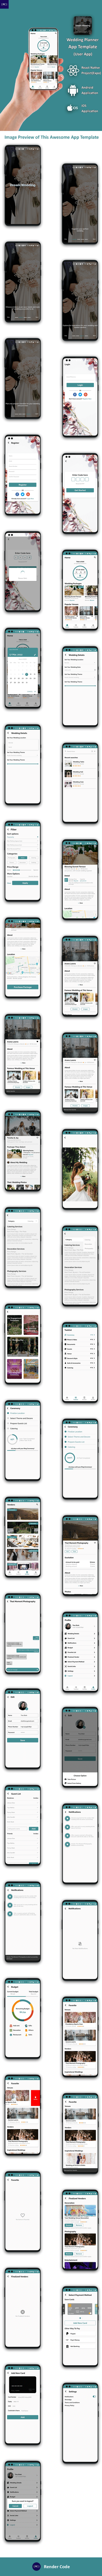 Wedding Planning Android App Template + iOS App Template | 2 Apps | React Native | DreamWedding - 11